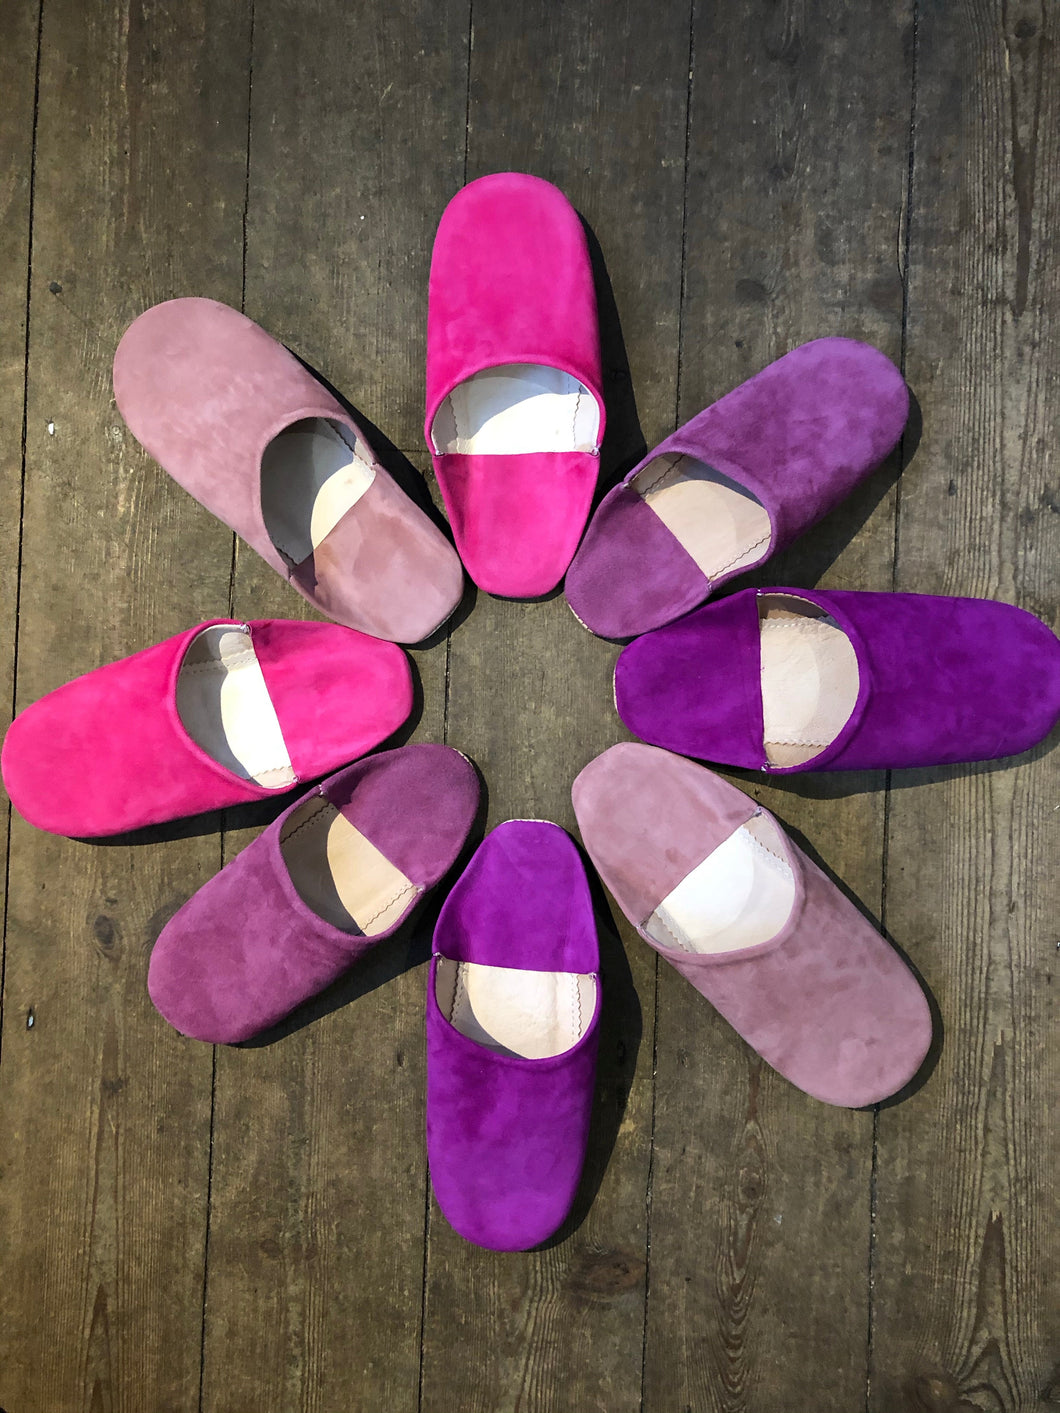 Maroc Suede Slippers - Pinks